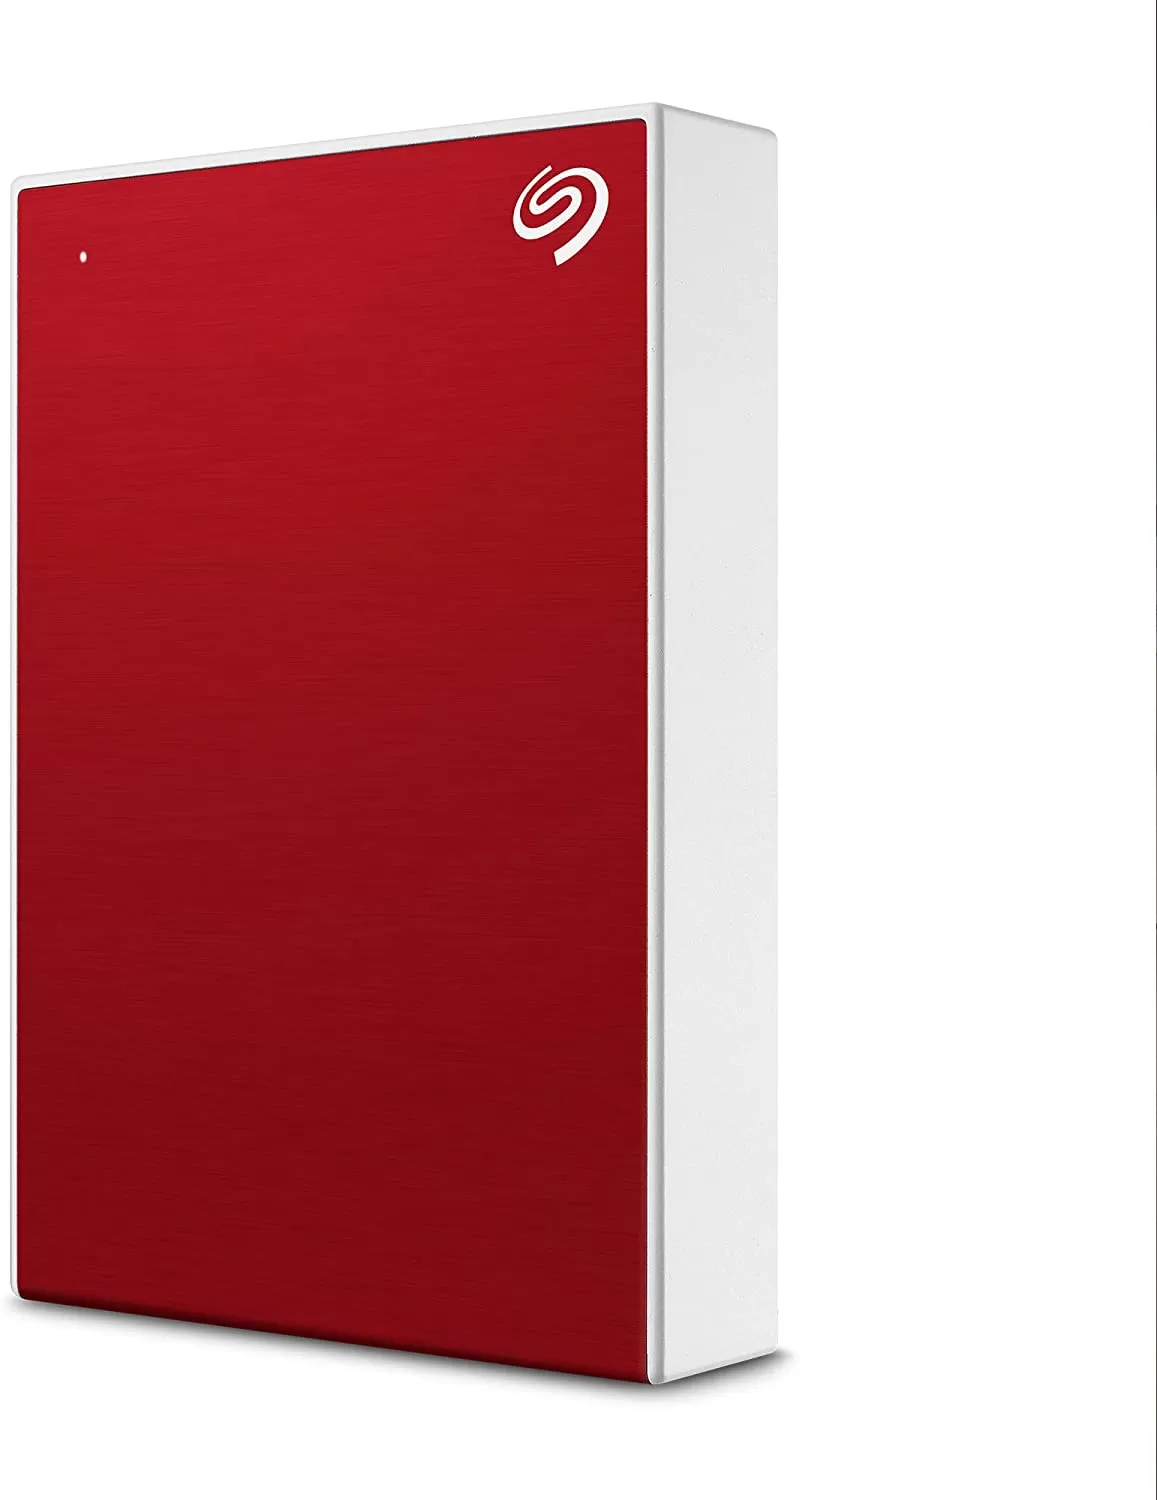 Hard Disk Extern Seagate One Touch 4TB USB 3.0 Red